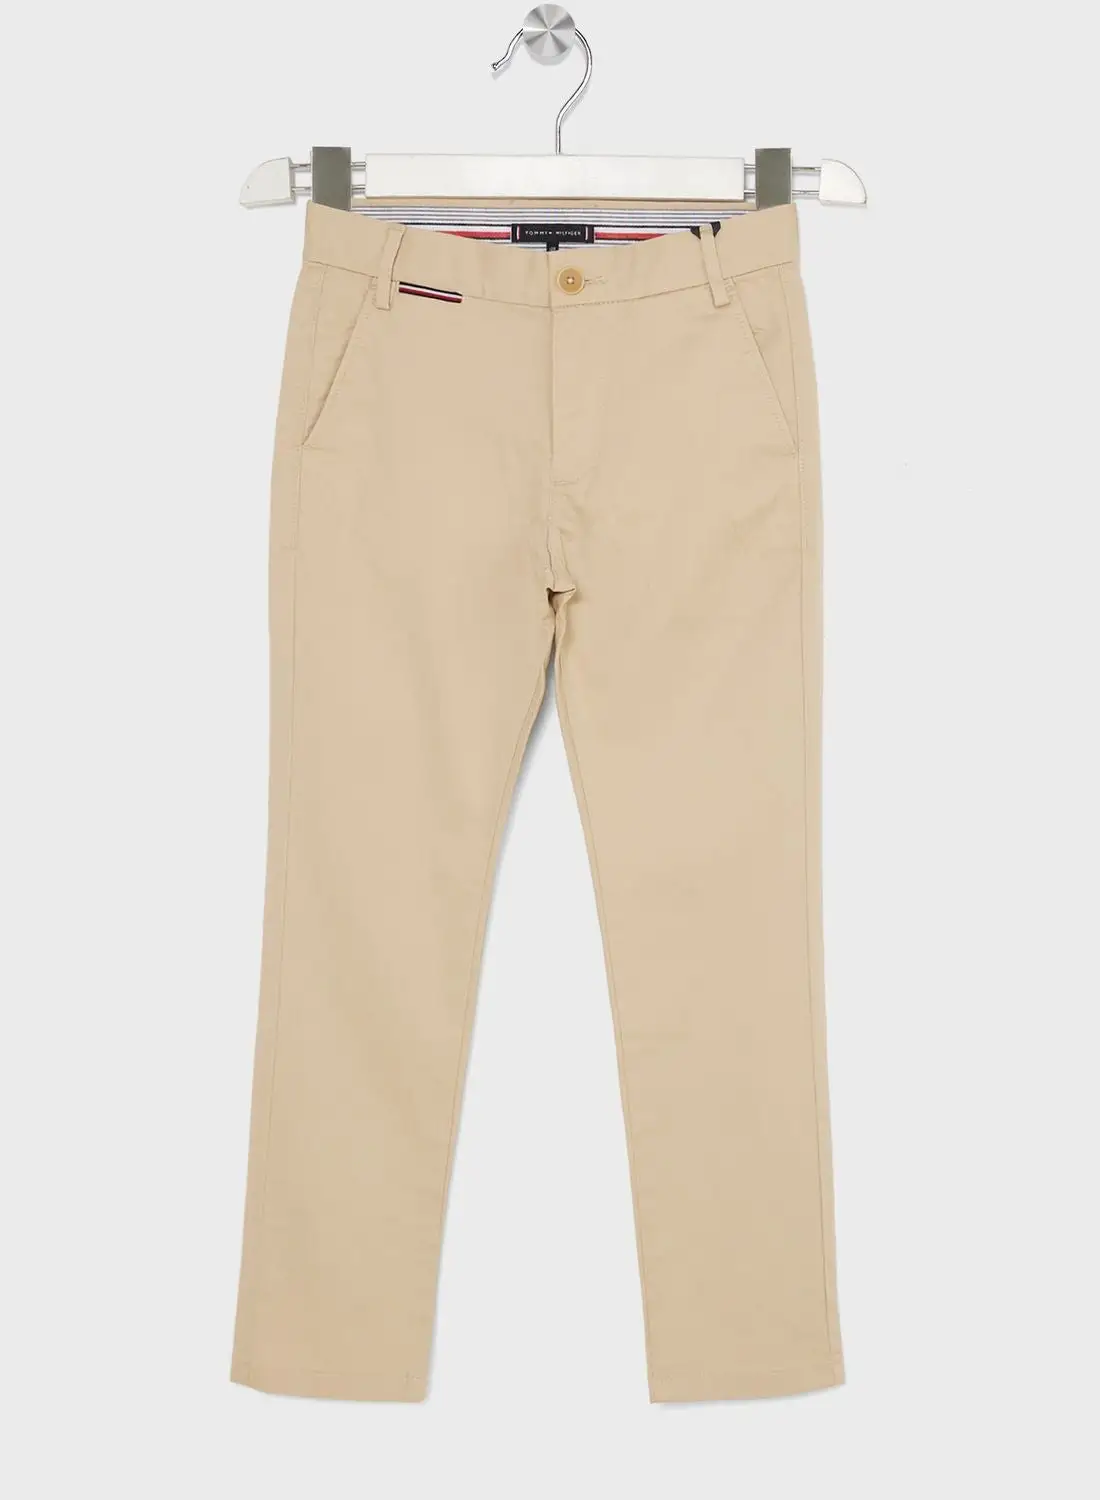 TOMMY HILFIGER Youth Essential Chino Pants